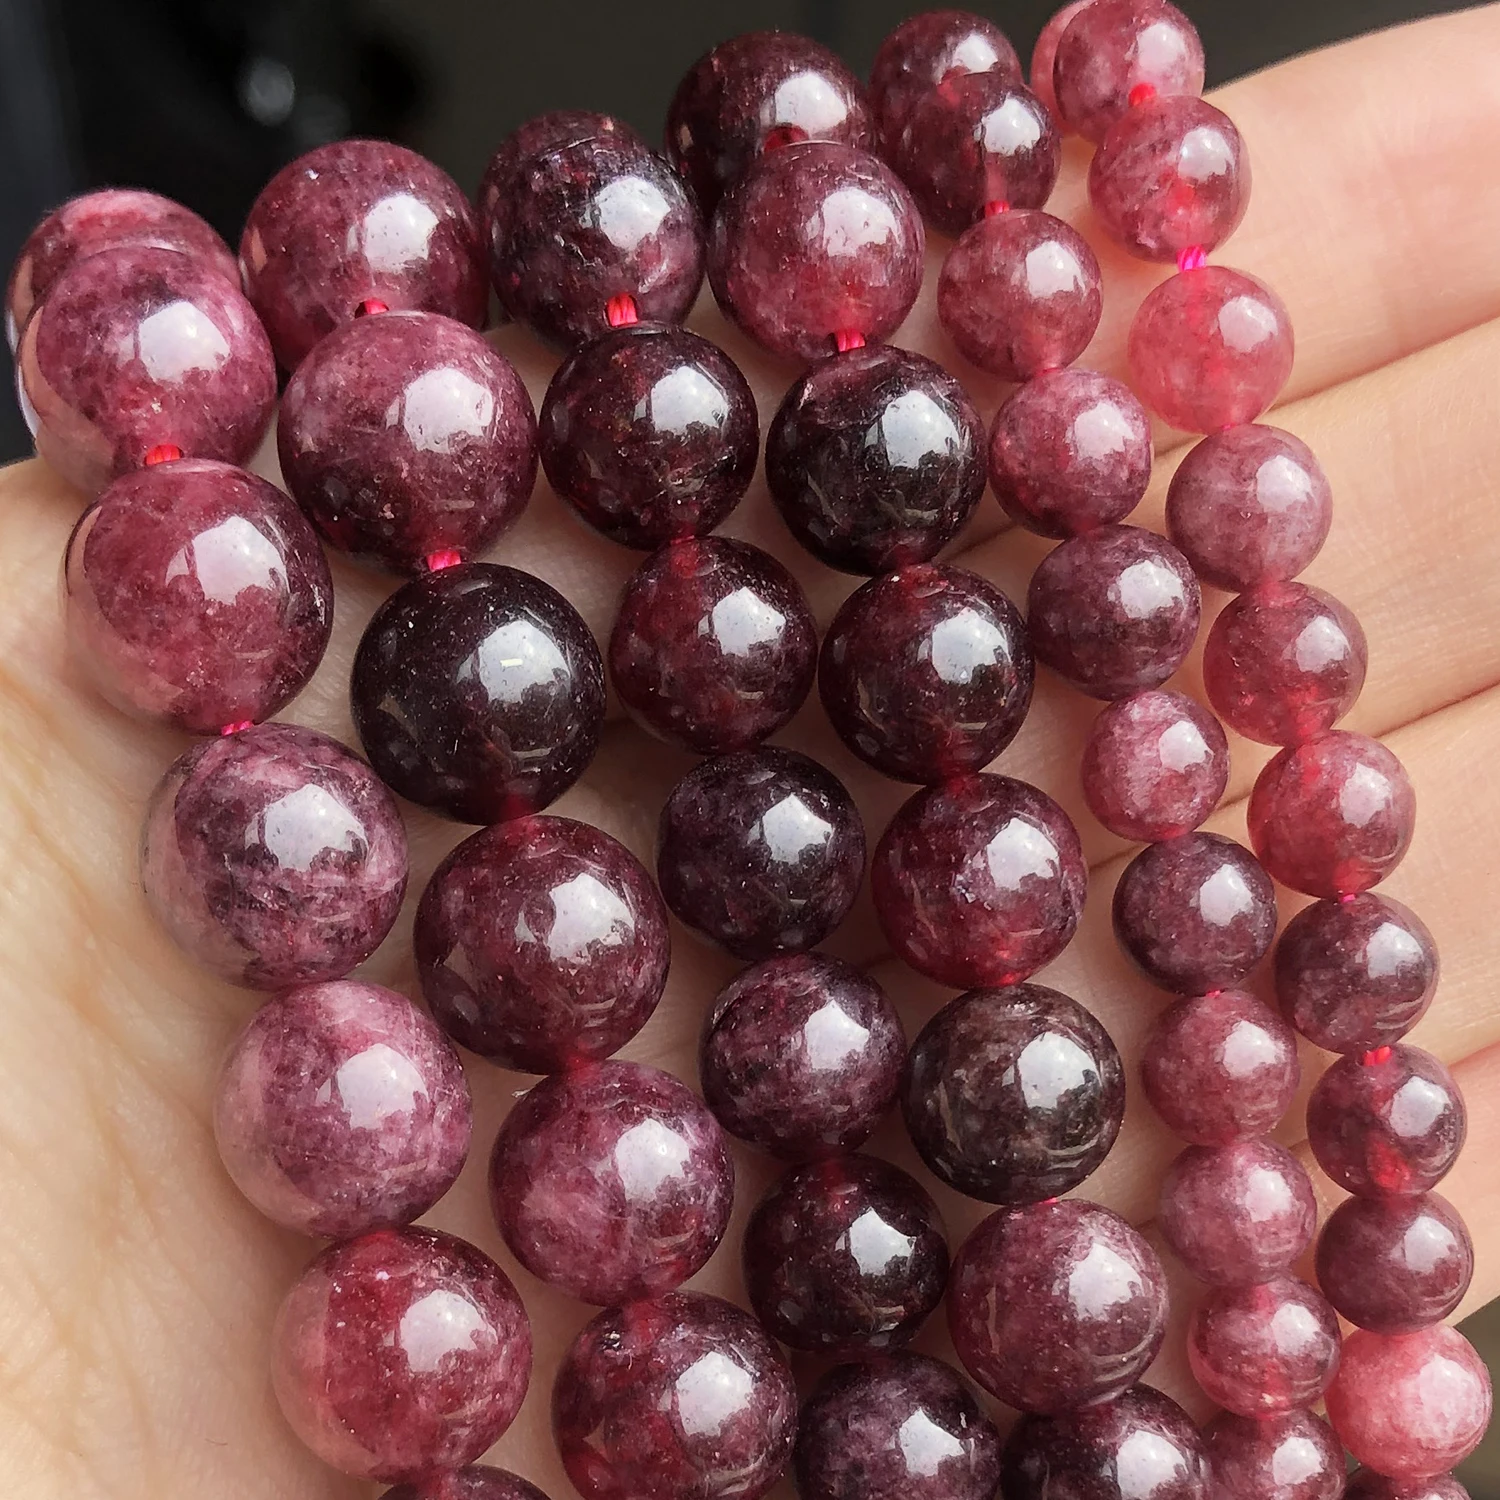 

Natural Stone Dark Red Garnet Quartz Round Loose Beads for Jewelry Making Diy Bracelet Accessories 15''Inches Pick Size 6 8 10mm